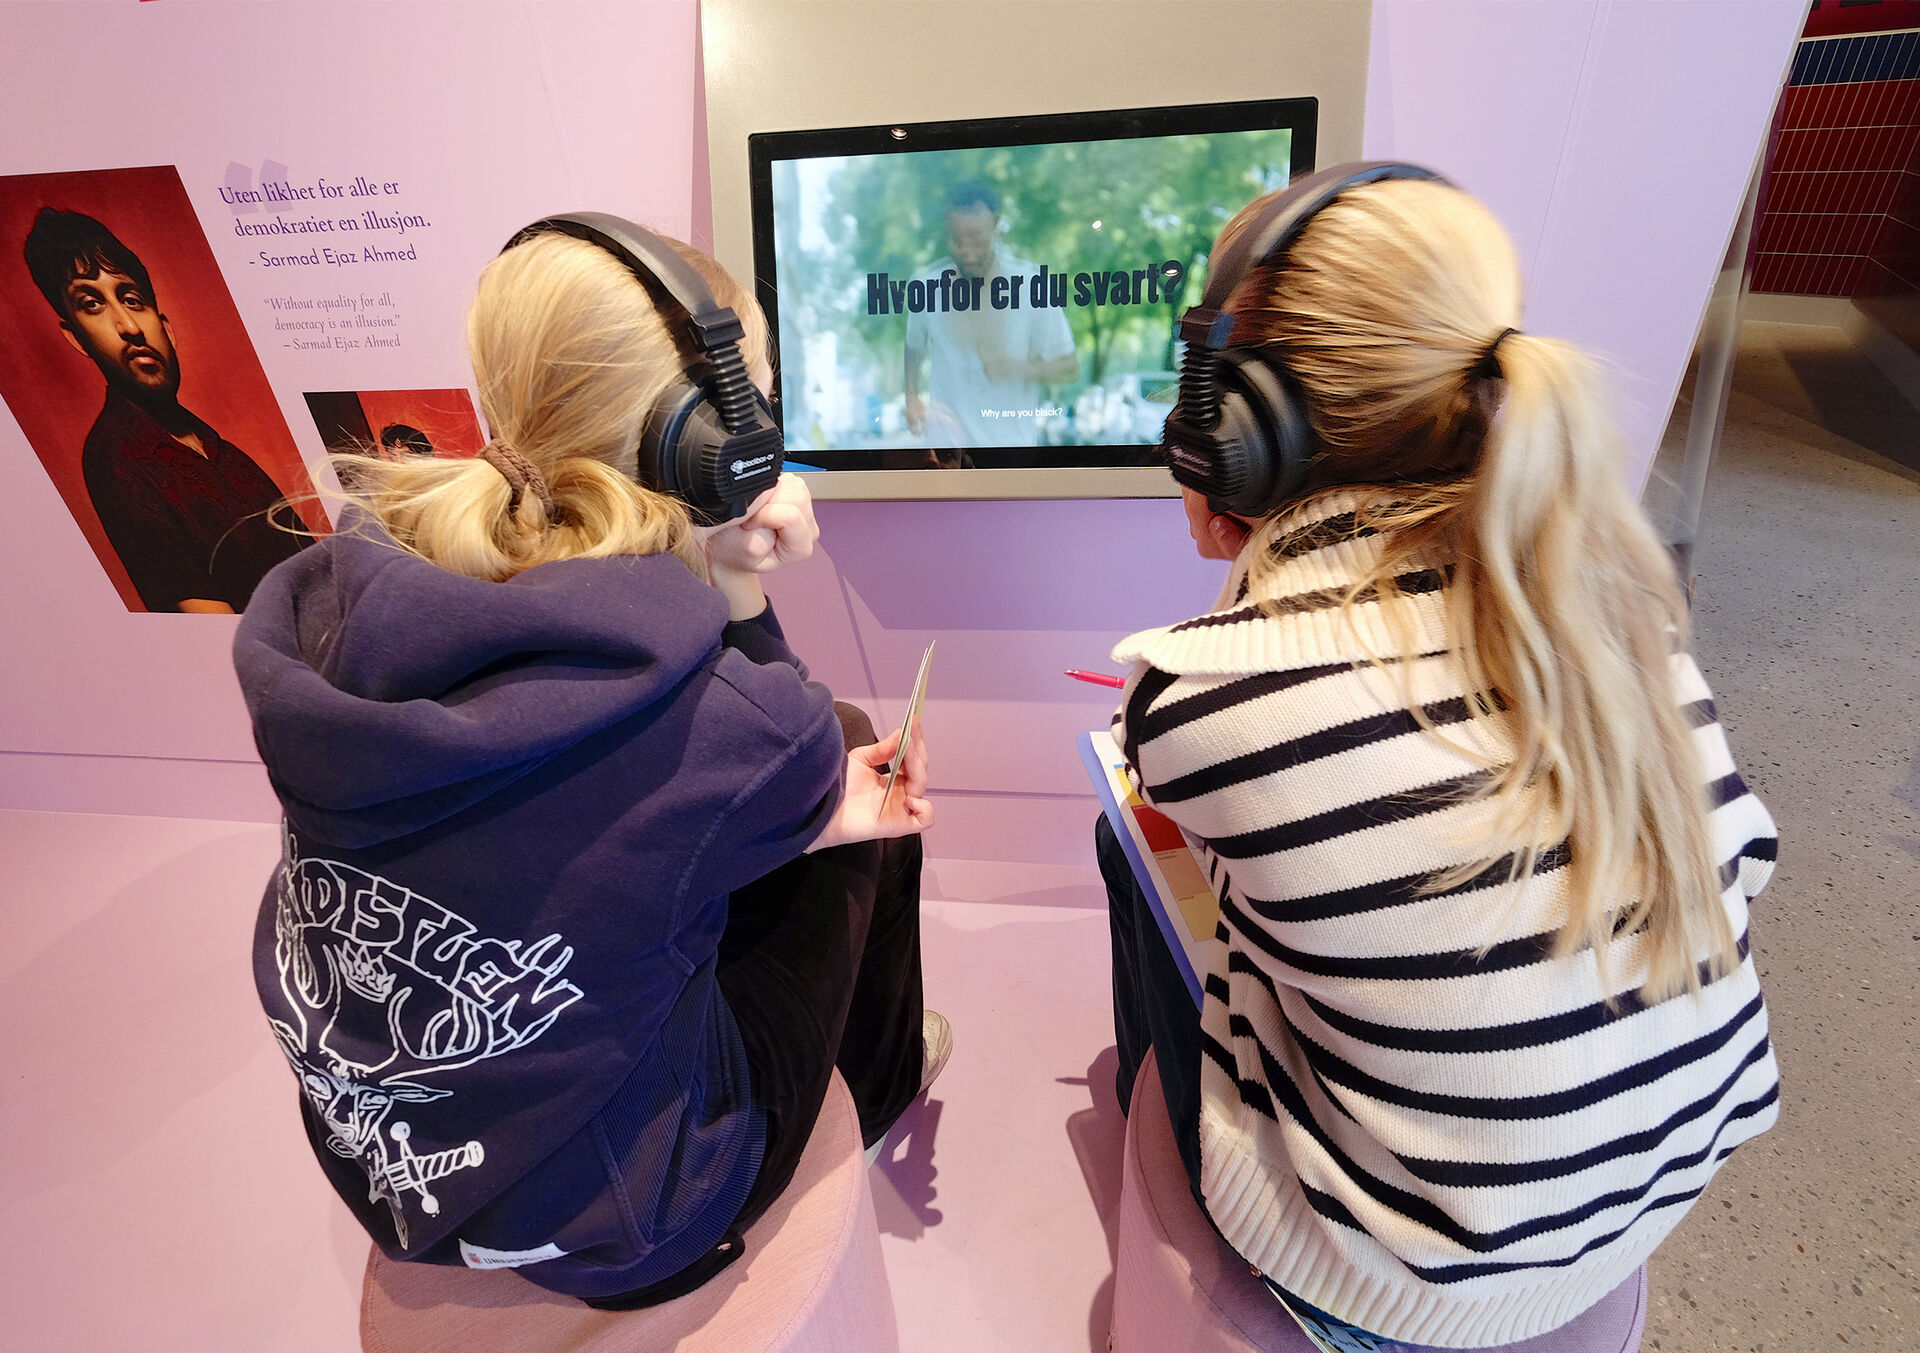 Two young girls with headset watching a screem